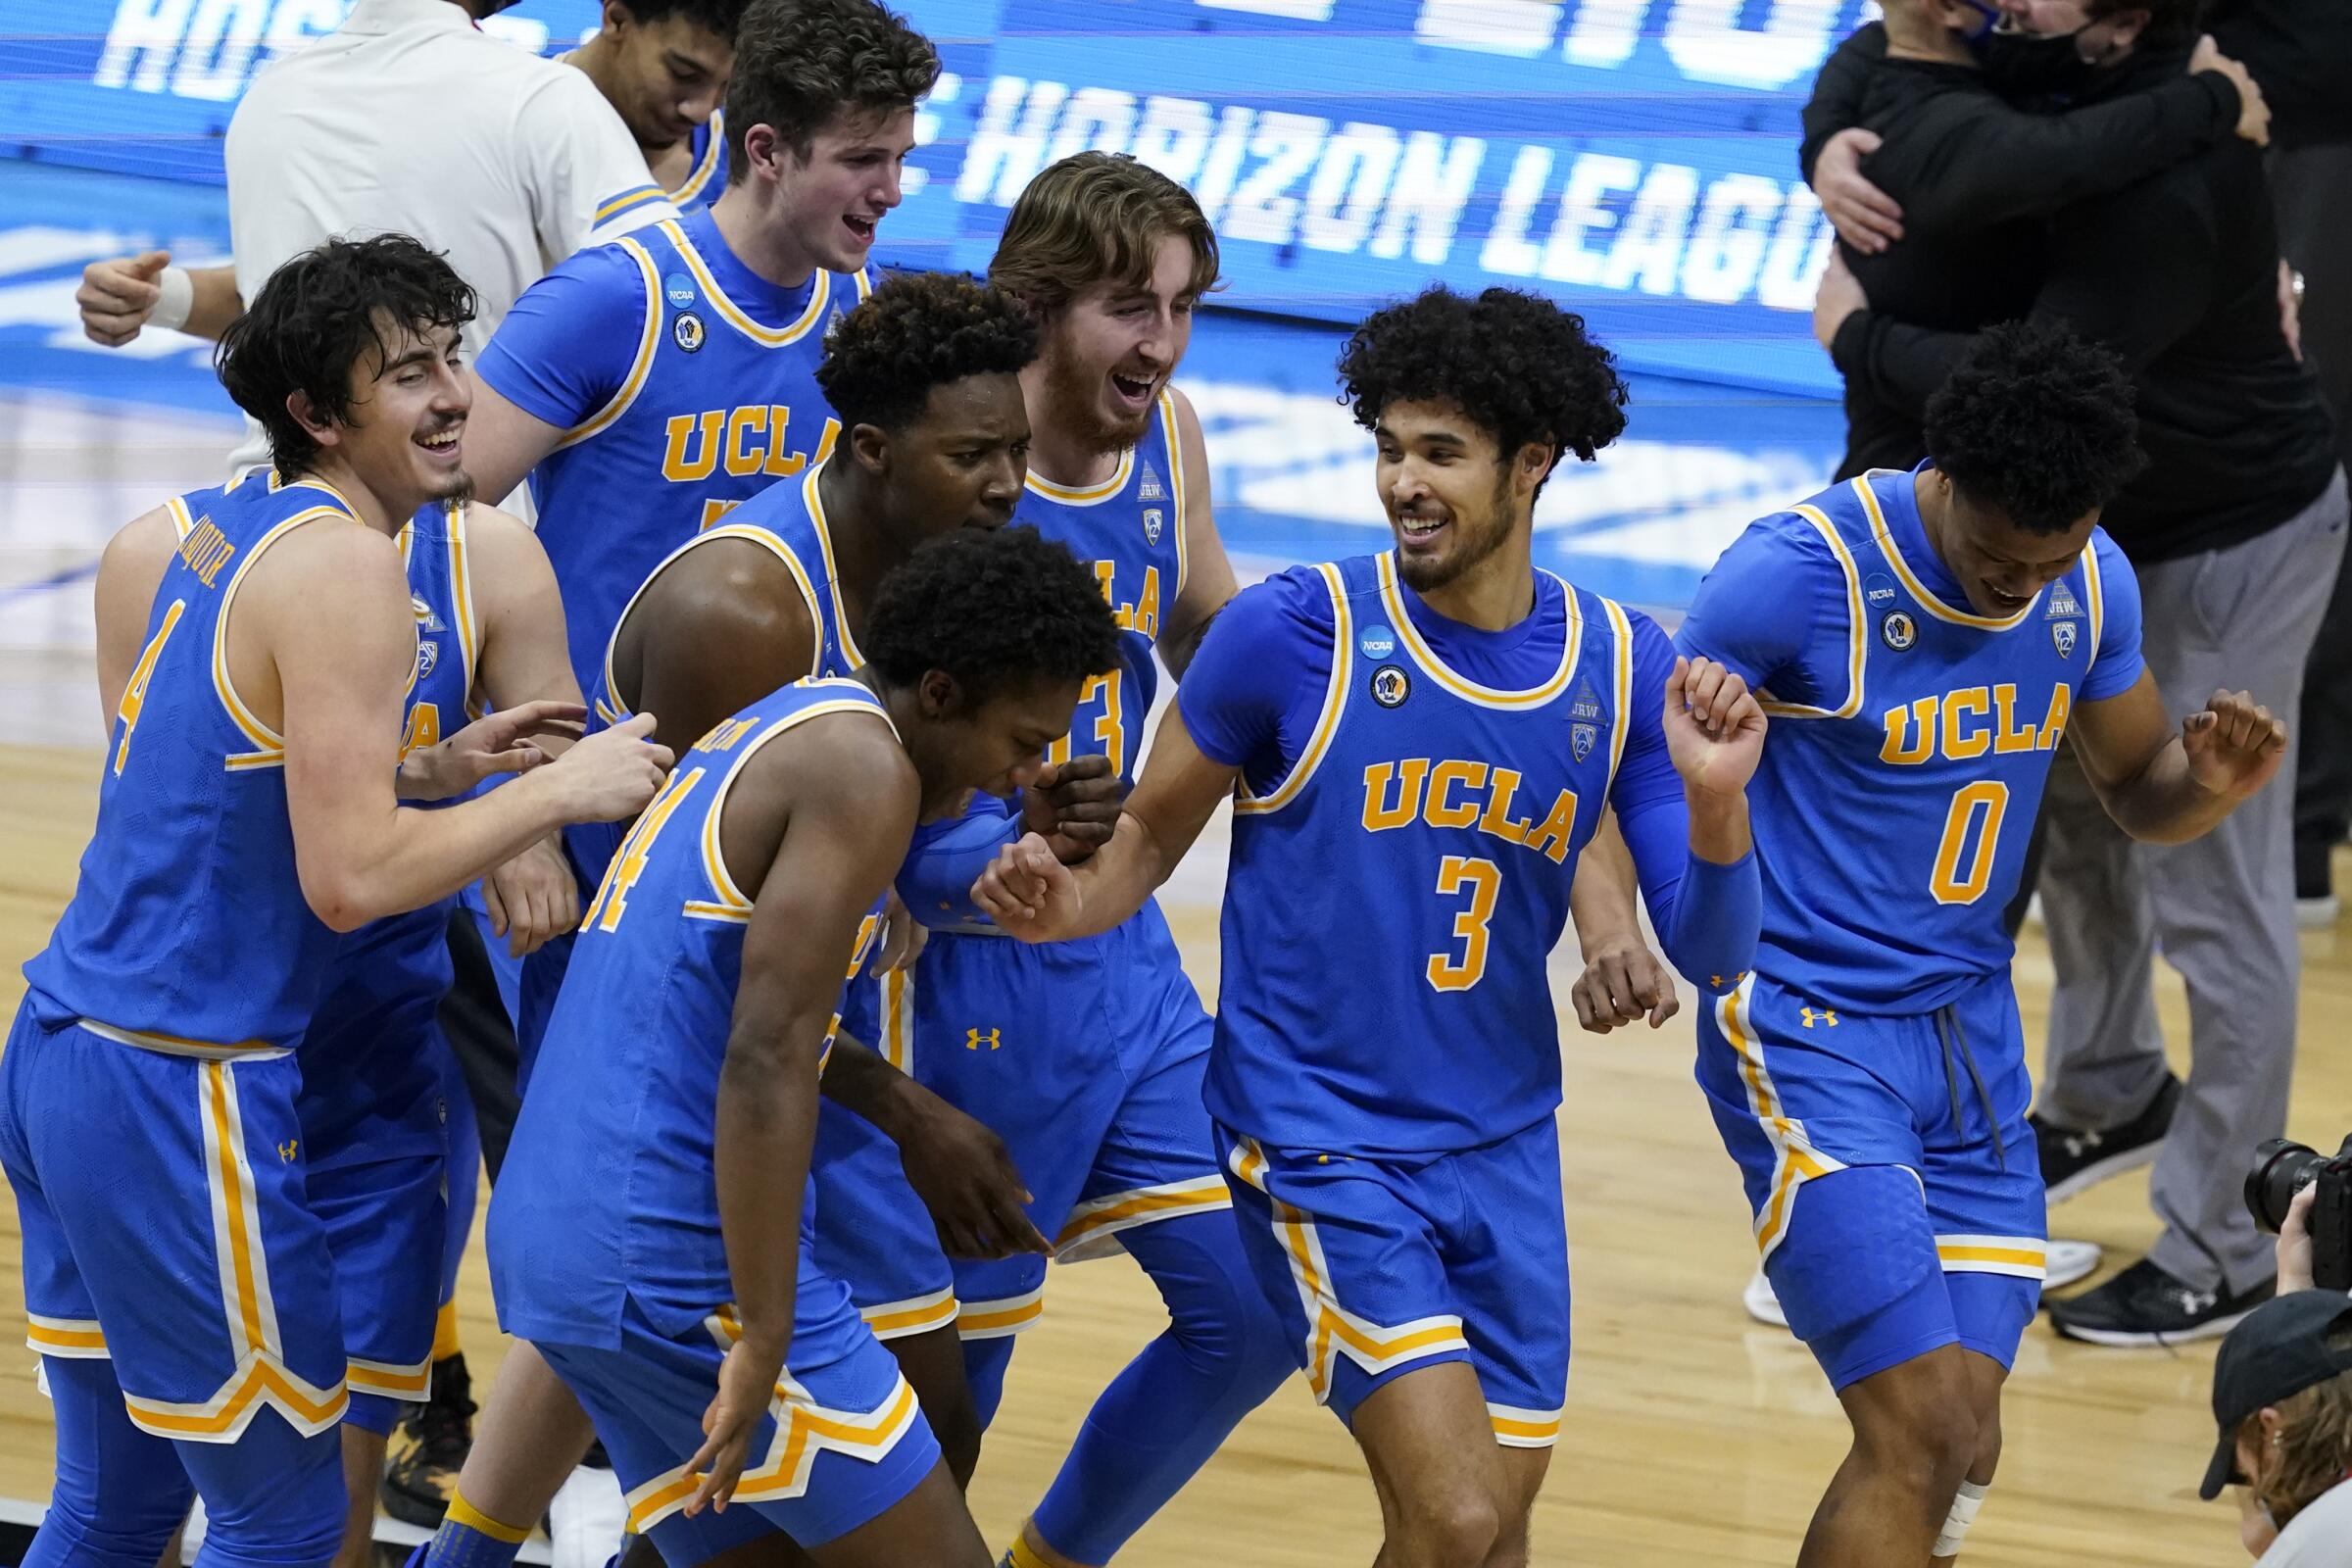 UCLA players celebrate after an Elite Eight game against Michigan in the NCAA men's college basketball tournament.